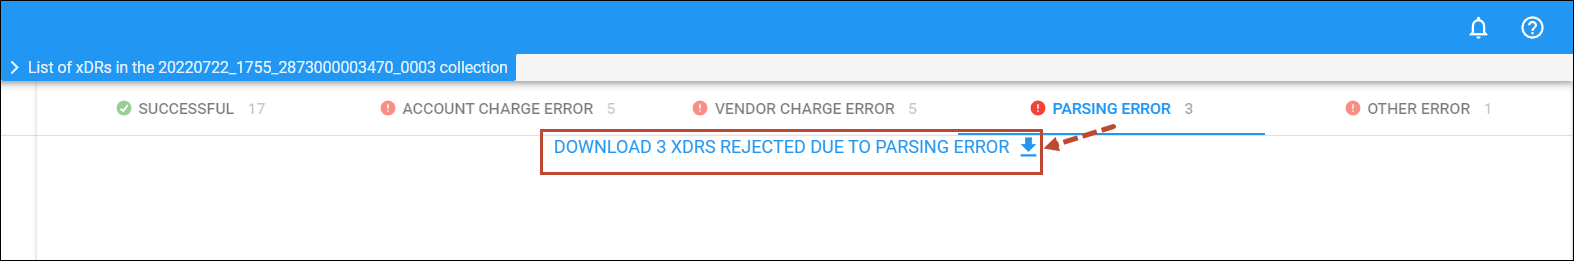 Download xDRs rejected due to parsing error